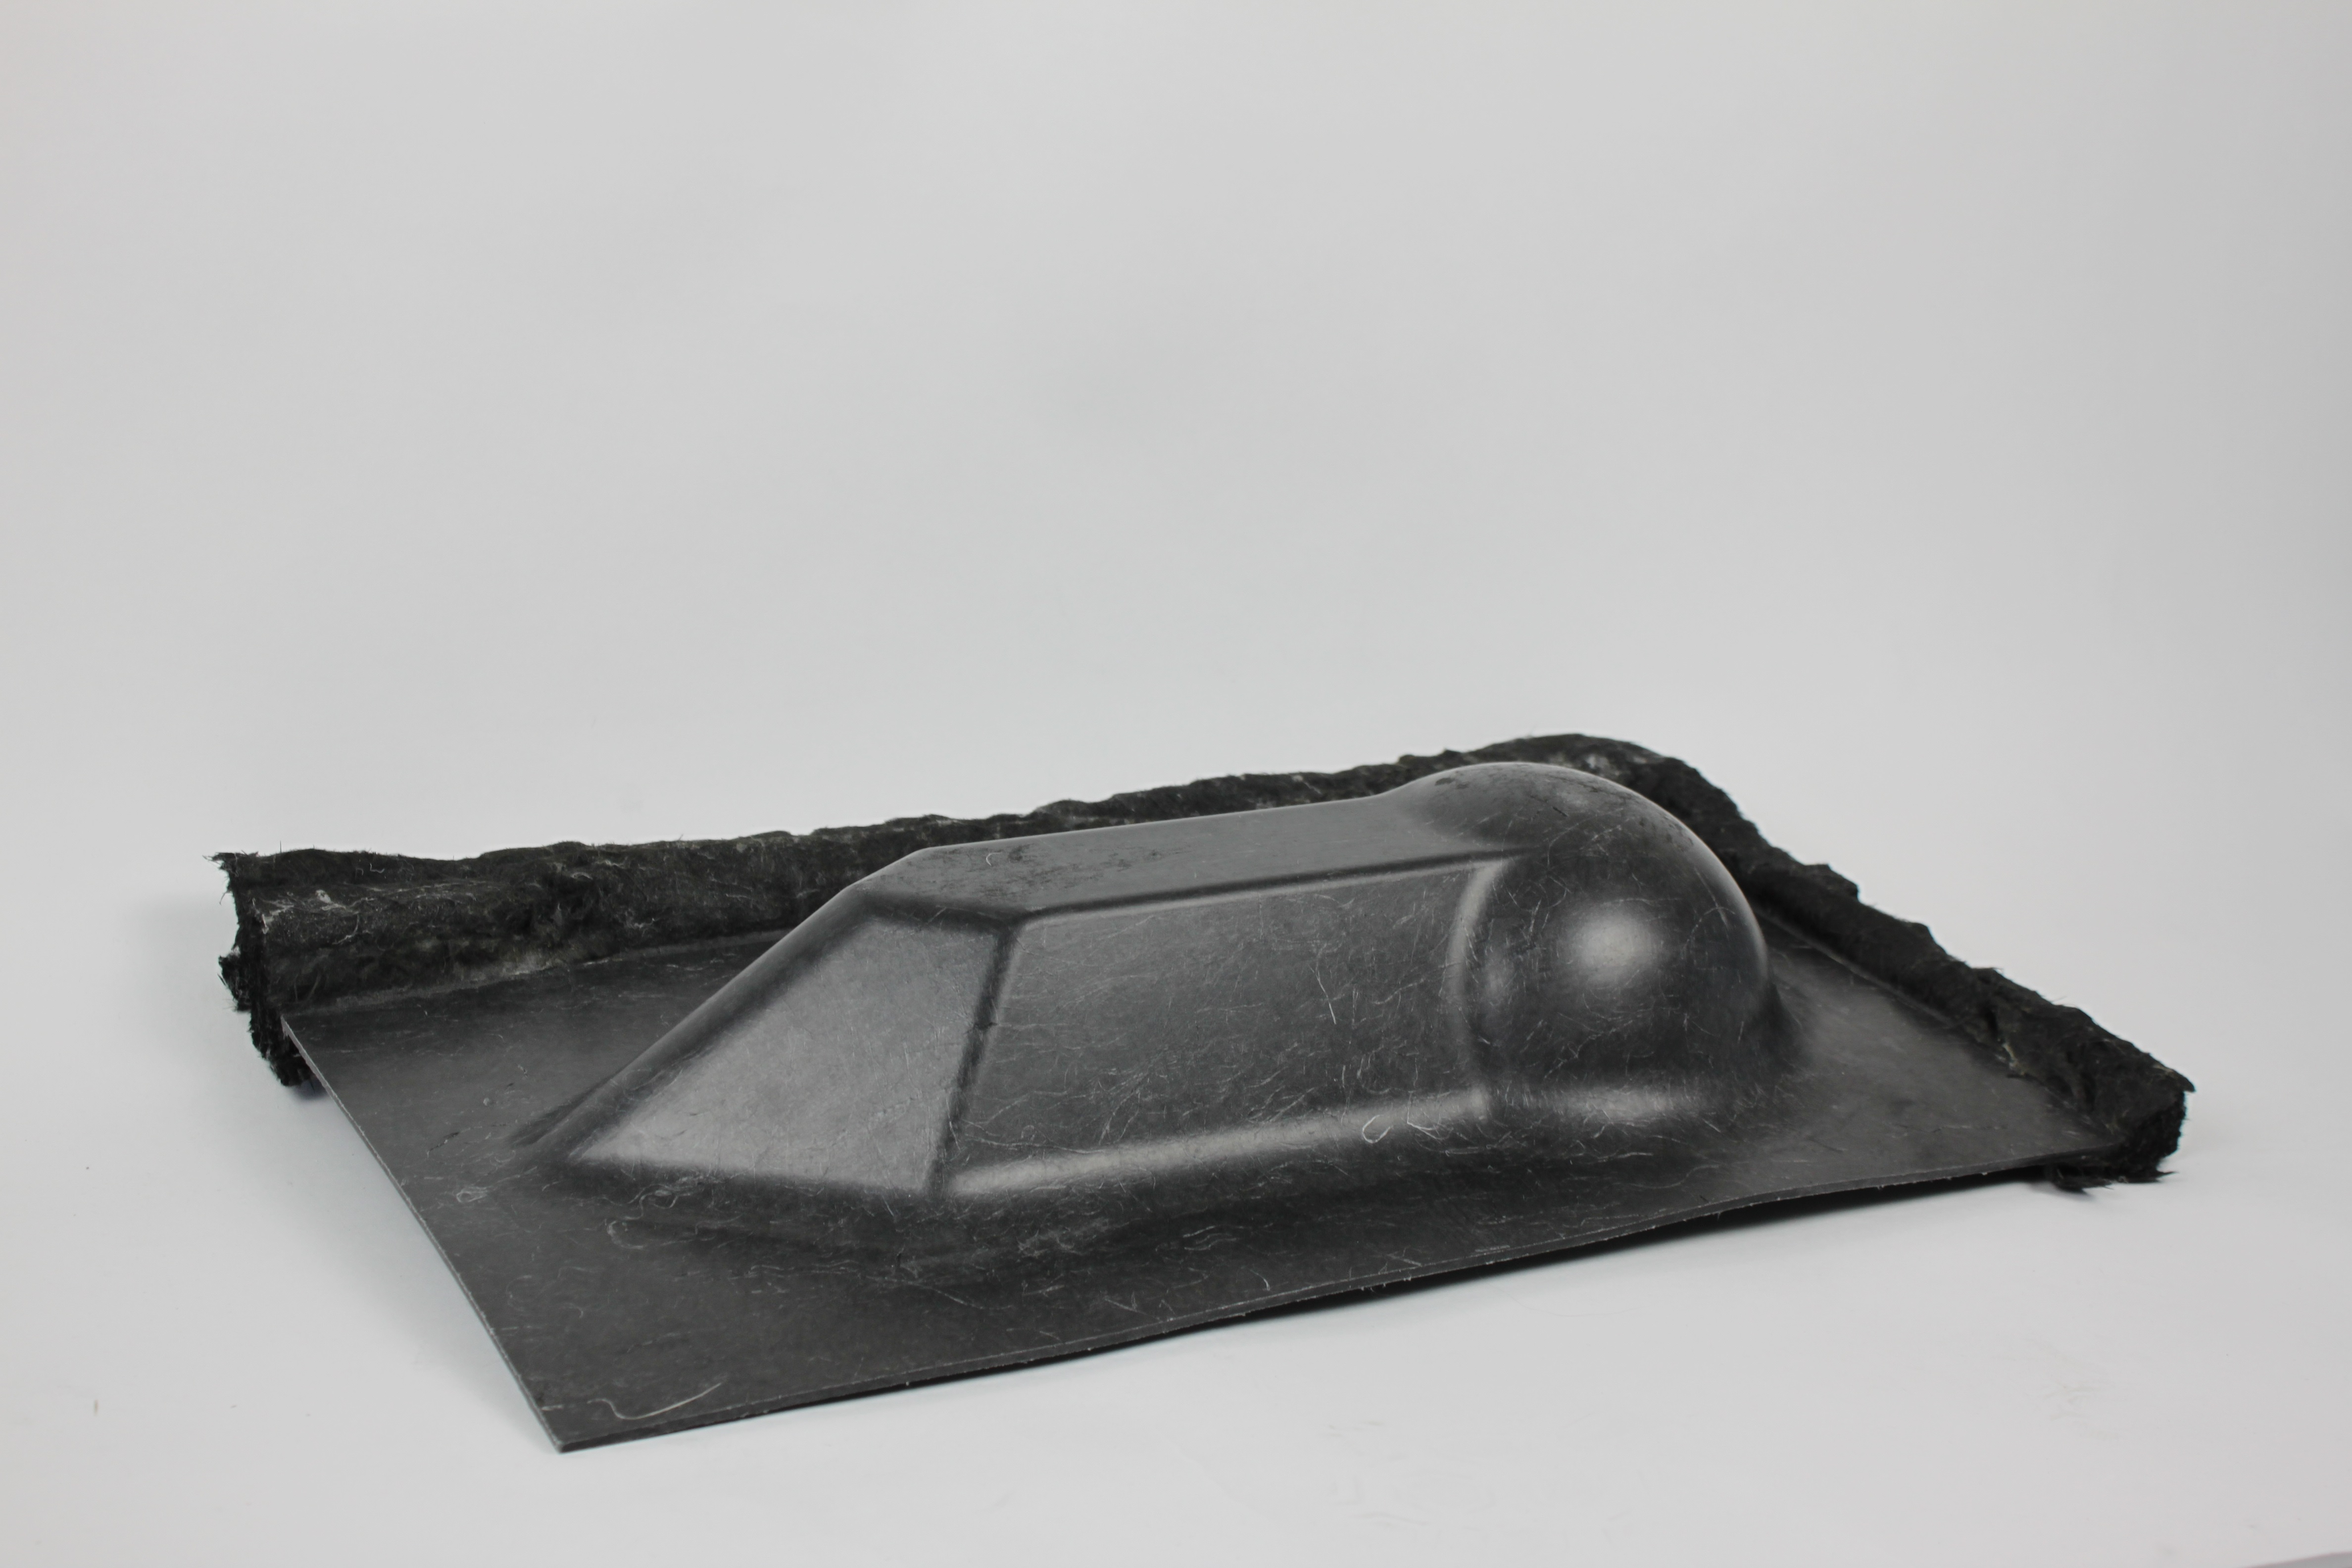 Exemplary demonstrator made of recycled carbon fibers (further components in planning)